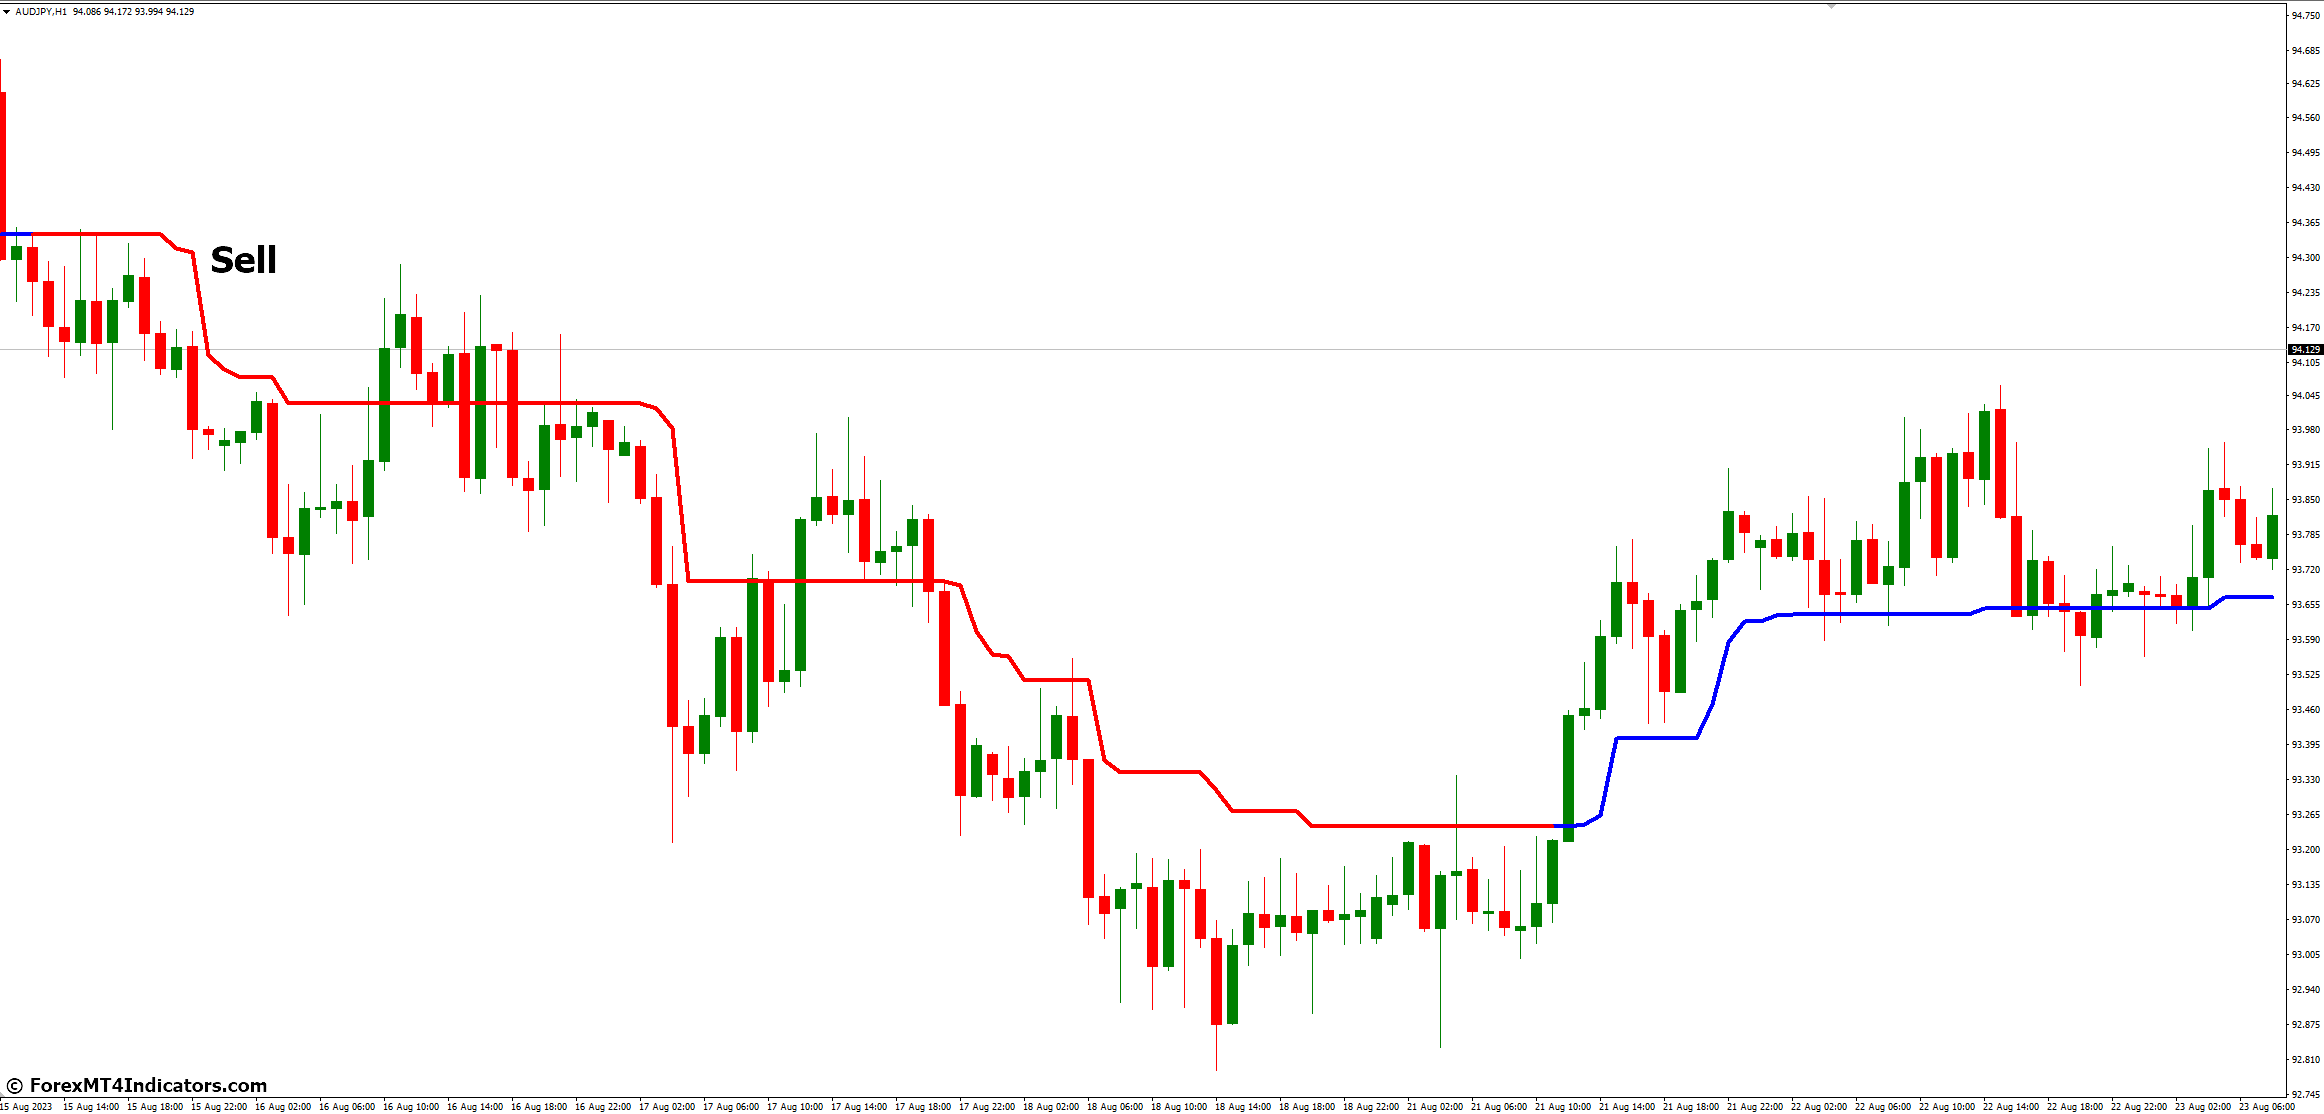 How to Trade with Trend Magic MT4 Indicator - Sell Entry